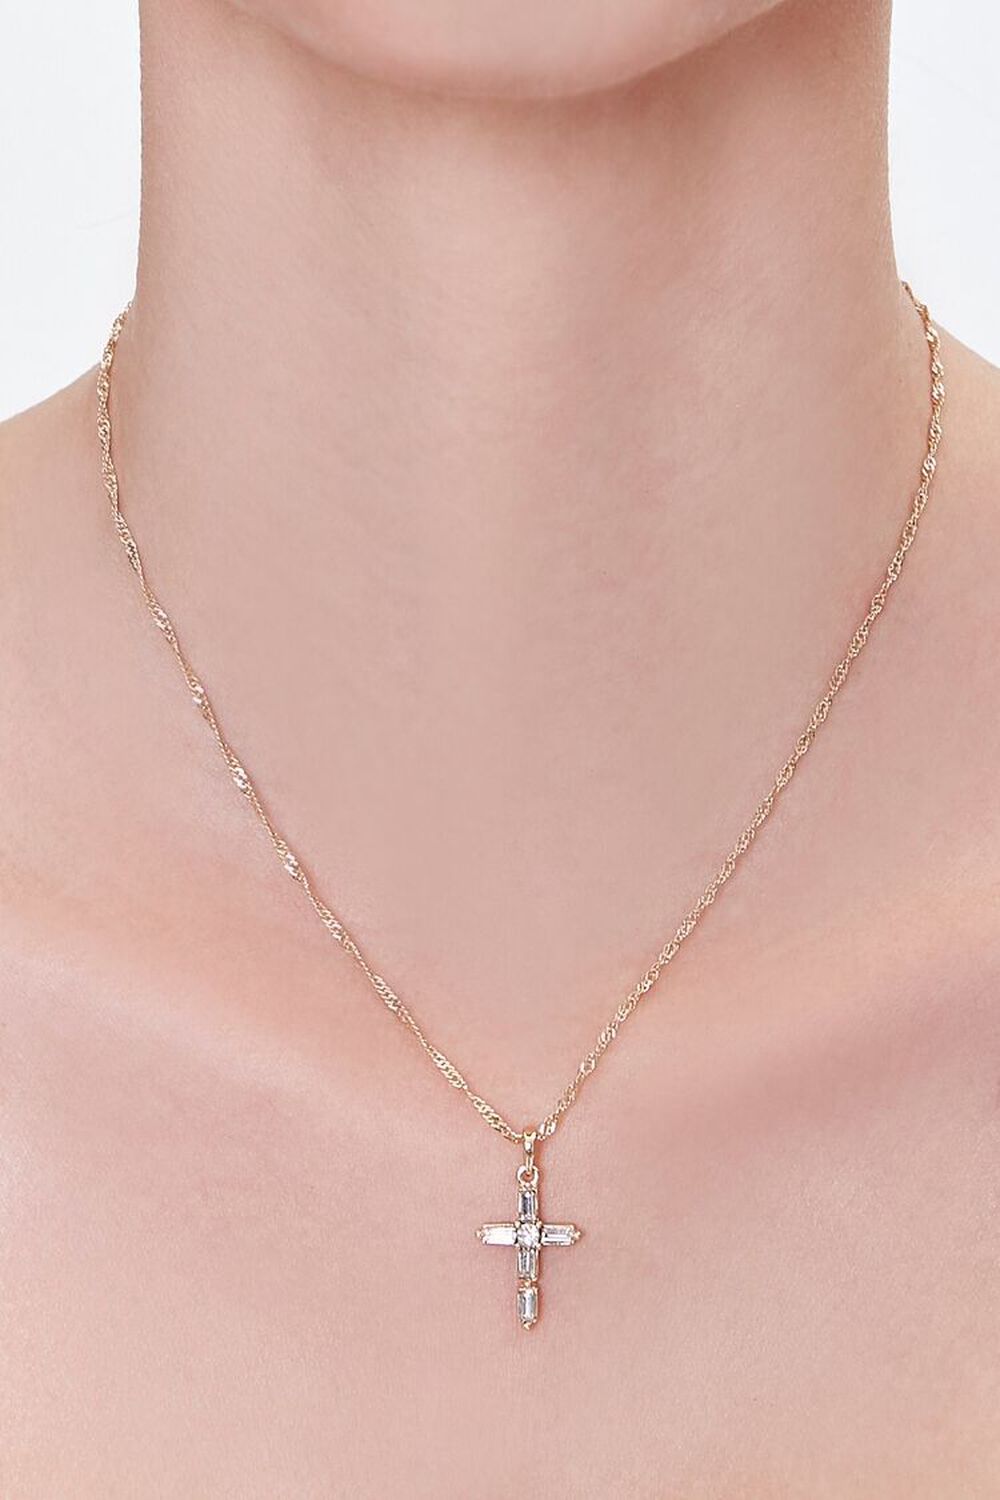 GOLD/CLEAR Cross Pendant Chain Necklace, image 1